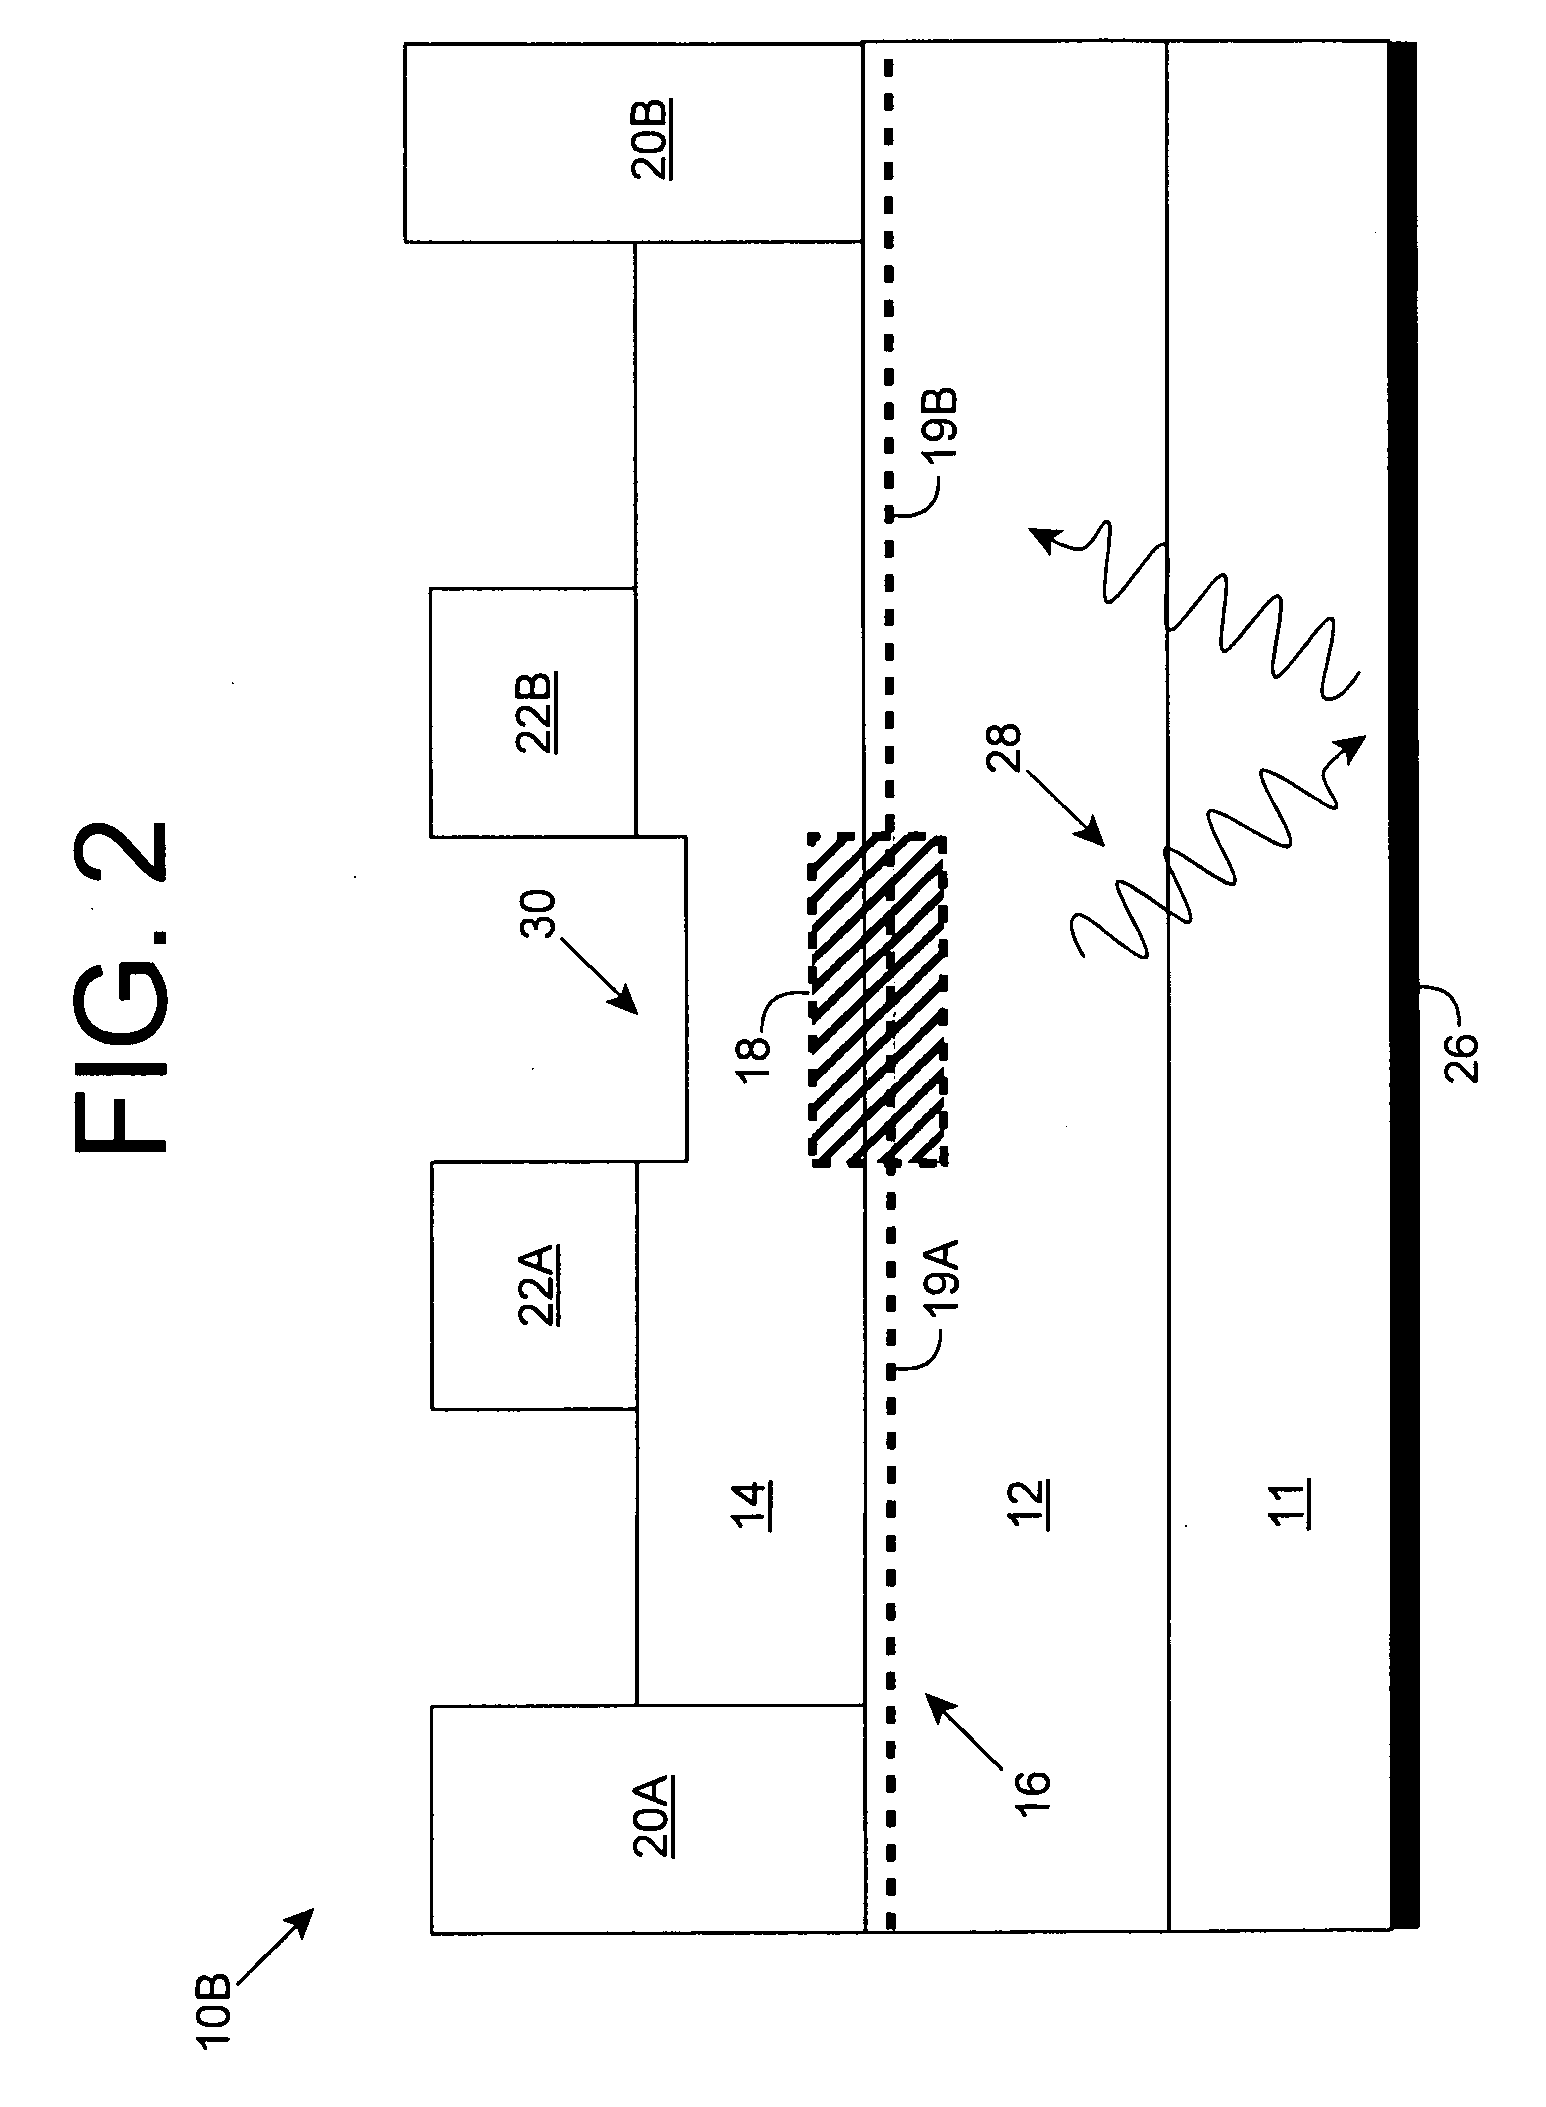 Device having active region with lower electron concentration